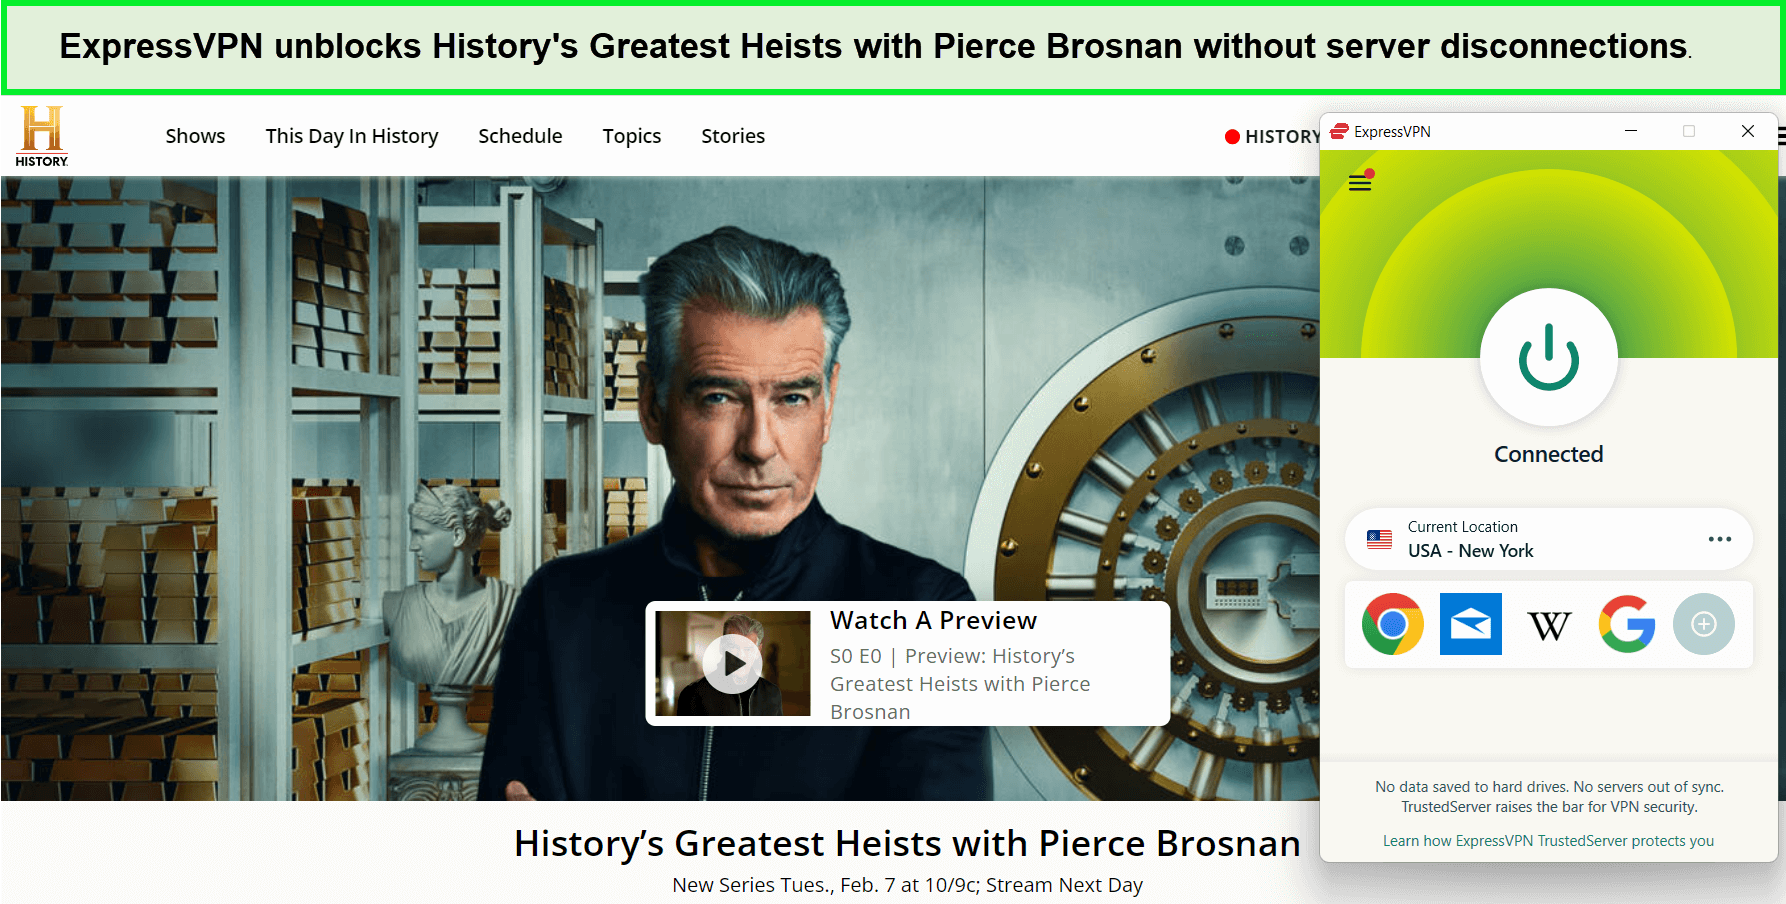 expressvpn-unblocks-historys-greatest-heists-with-pierce-brosnan-on-discovery-plus-via-history-channel